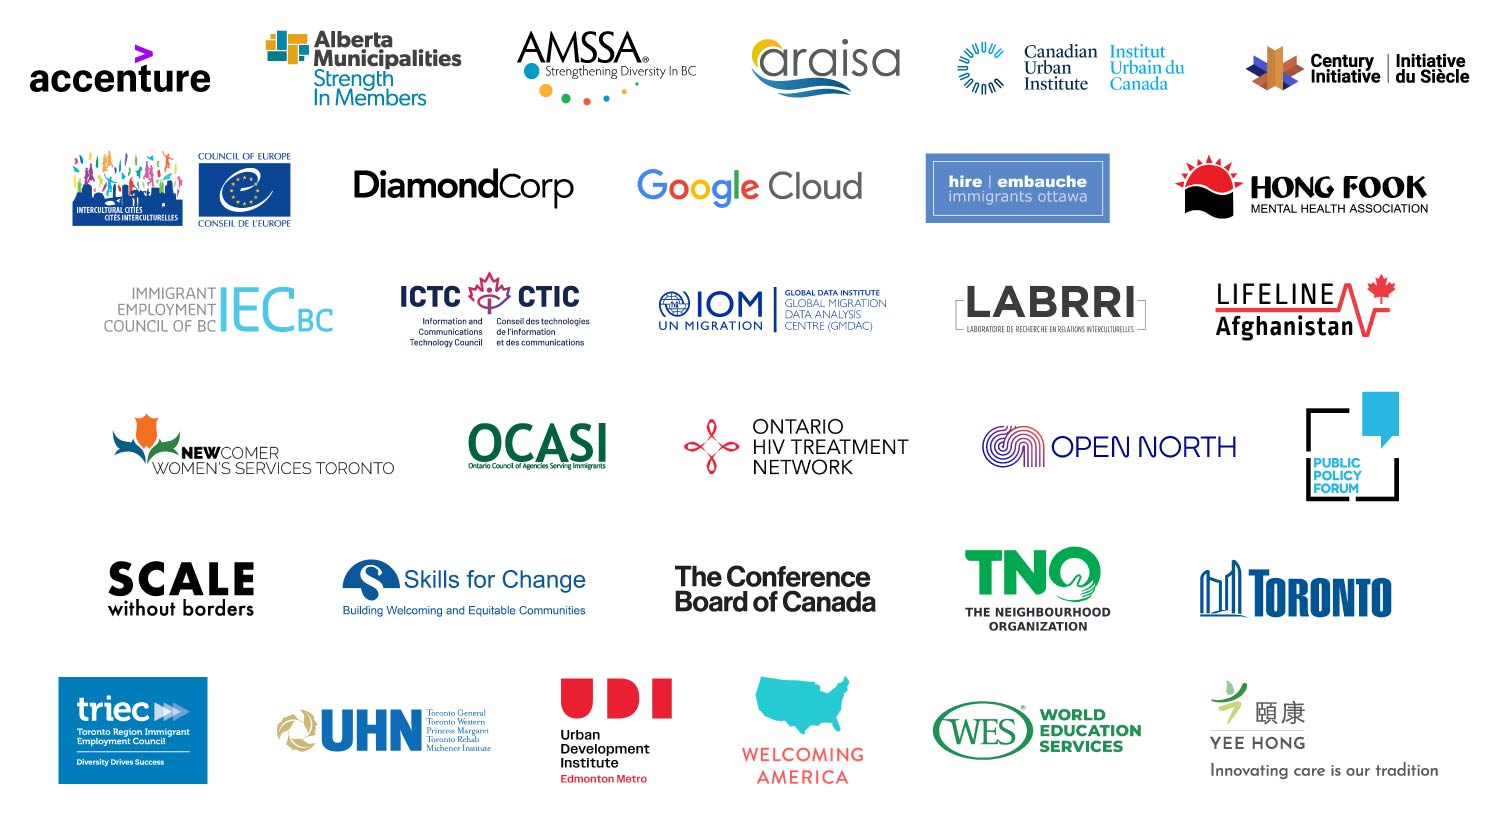 Logos of Bridging Divides non-academic partners:  Accenture, Alberta Municipalities, Affiliation of Multicultural Societies and Service Agencies of BC (AMSSA), Atlantic Region Association of Immigrant Serving Agencies (ARAISA), Canadian Urban Institute, Century Initiative, Council of Europe, DiamondCorp, Google, Hire Immigrants Ottawa (HIO), Hong Fook Mental Health Association, The Immigrant Employment Council of BC (IECBC), Information Communications Technology Council, IOM Global Migration Data Analysis Centre, Laboratoire de recherche en relations interculturelles de l'Université de Montréal (LABRI), Lifeline Afghanistan, Newcomer Women's Services Toronto, Ontario Council of Agencies Serving Immigrants (OCASI), Ontario HIV Treatment Support Network (OHTN), Open North, Public Policy Forum, Scale Without Borders, Skills for Change, Conference Board of Canada, The Neighbourhood Organization, City of Toronto, The Toronto Region Immigrant Employment Council (TRIEC), University Health Network, Urban Development Institute-Edmonton Metro, Welcoming America, World Education Services (WES), Yee Hong Centre for Geriatric Care